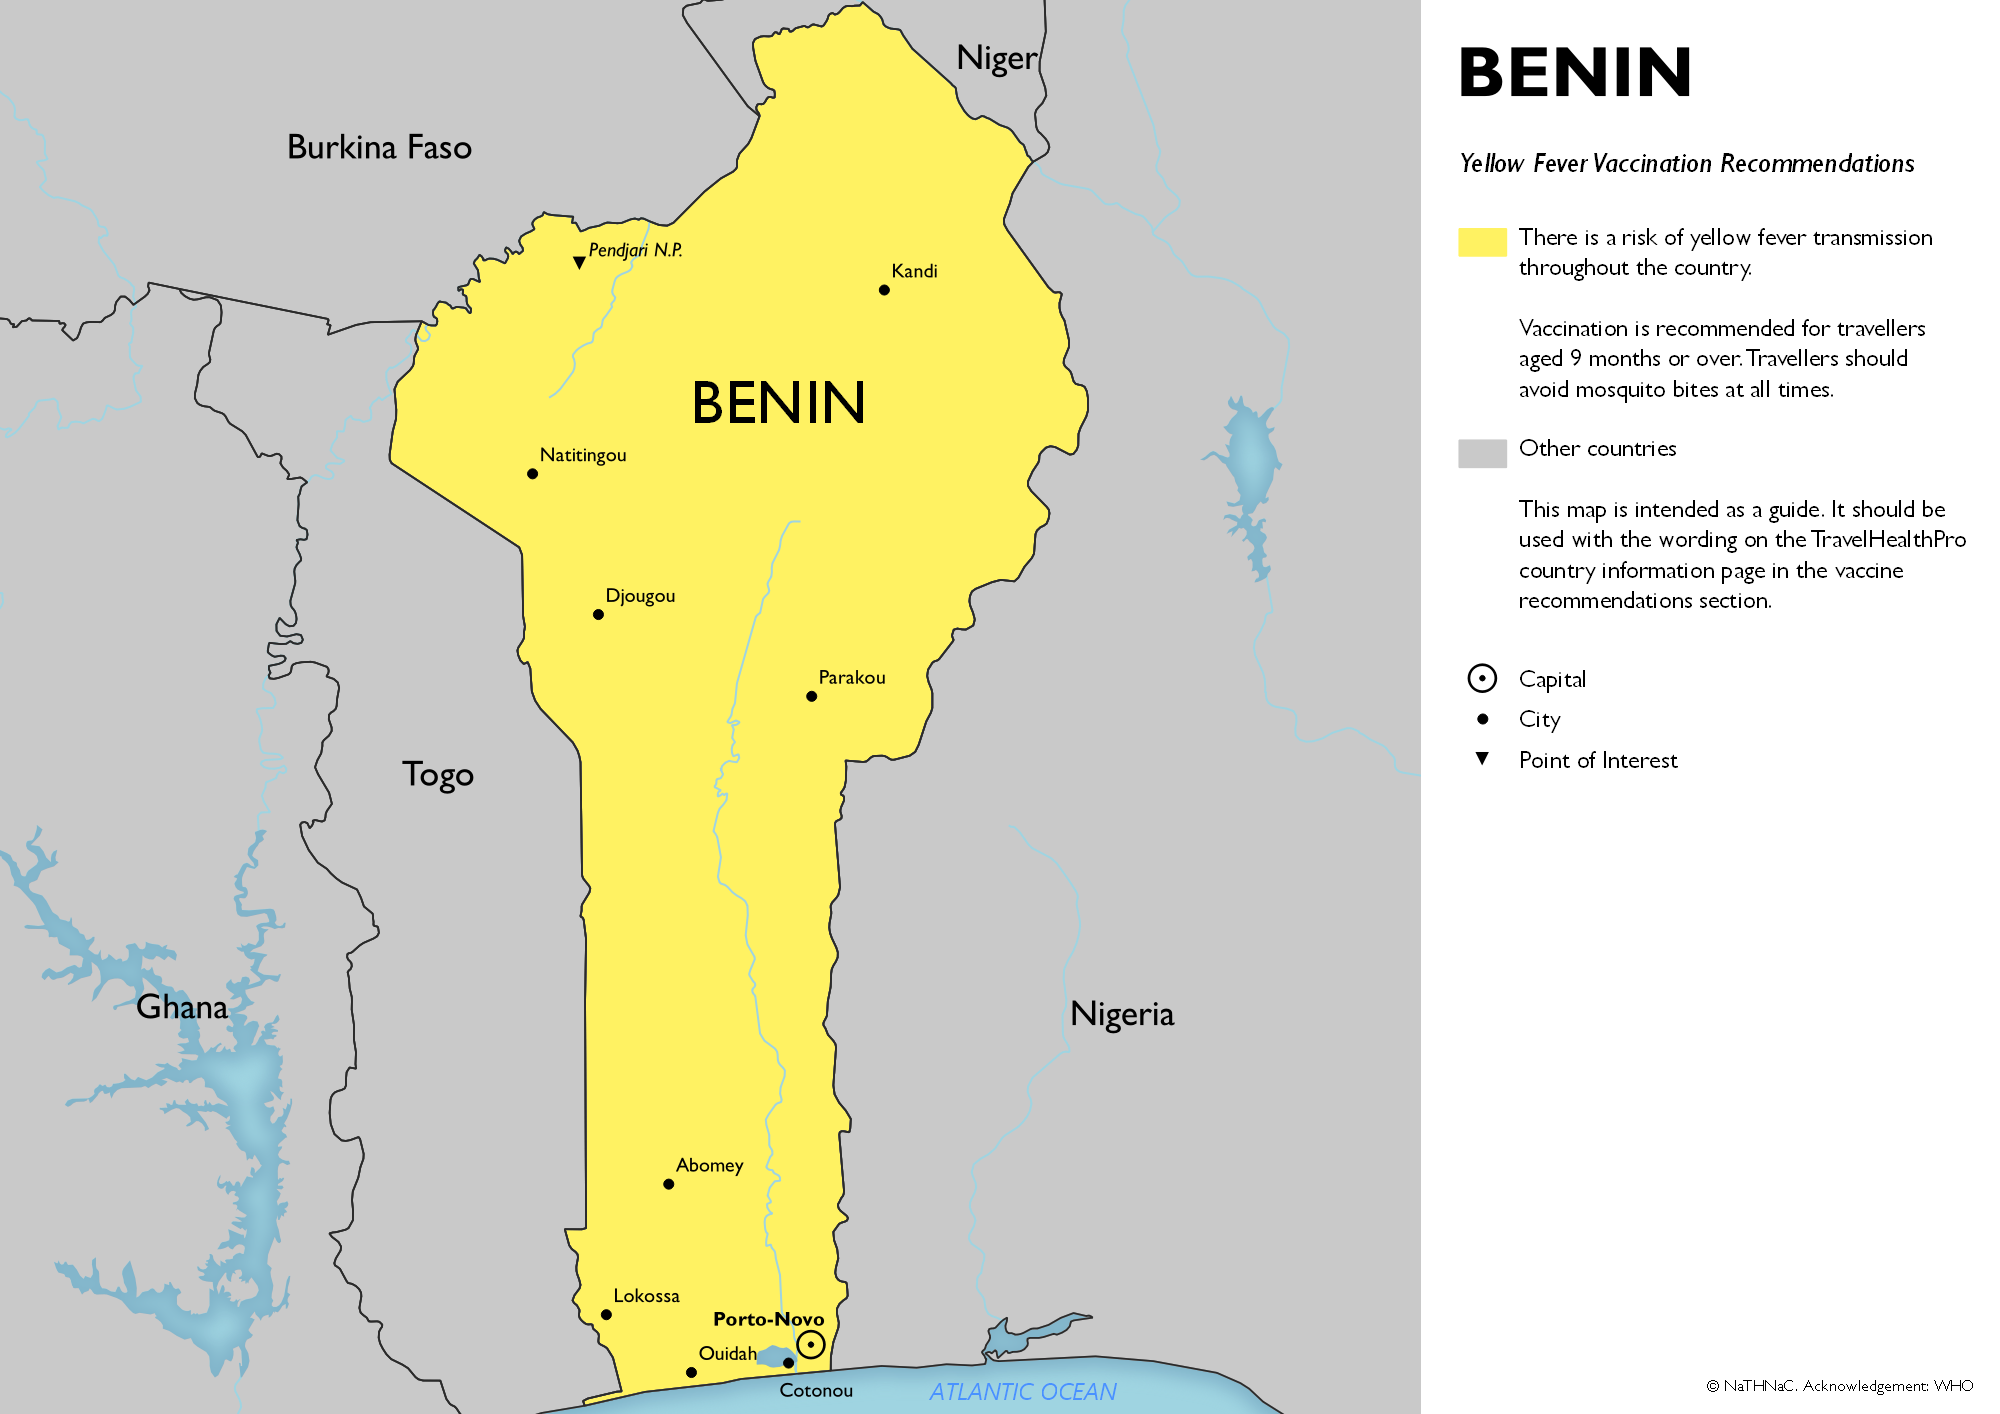 Yellow fever vaccine recommendation map for Benin